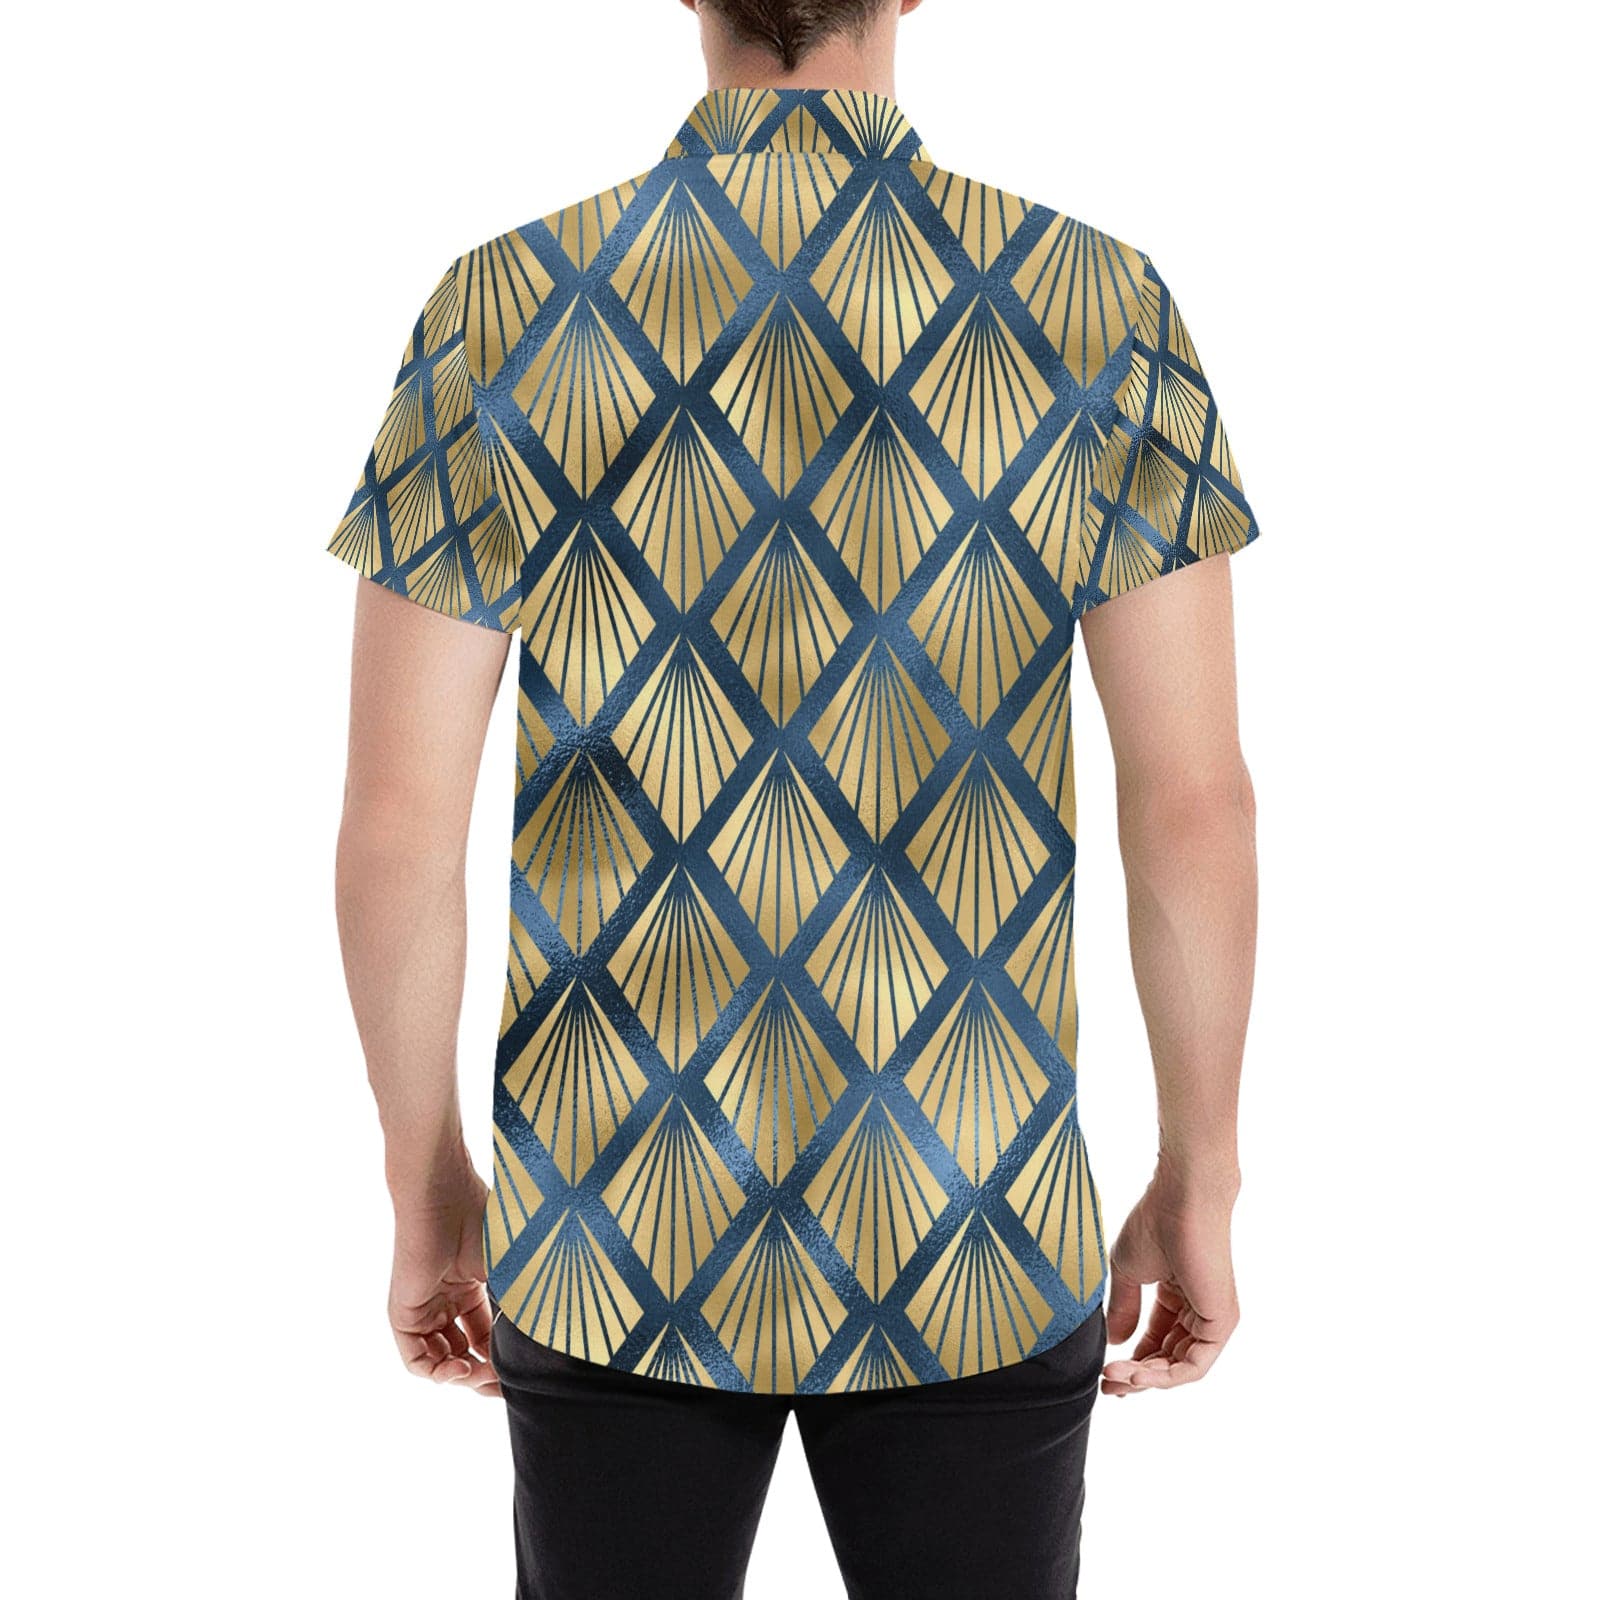 Blue and Gold Diamond Patterned Men's Shirt